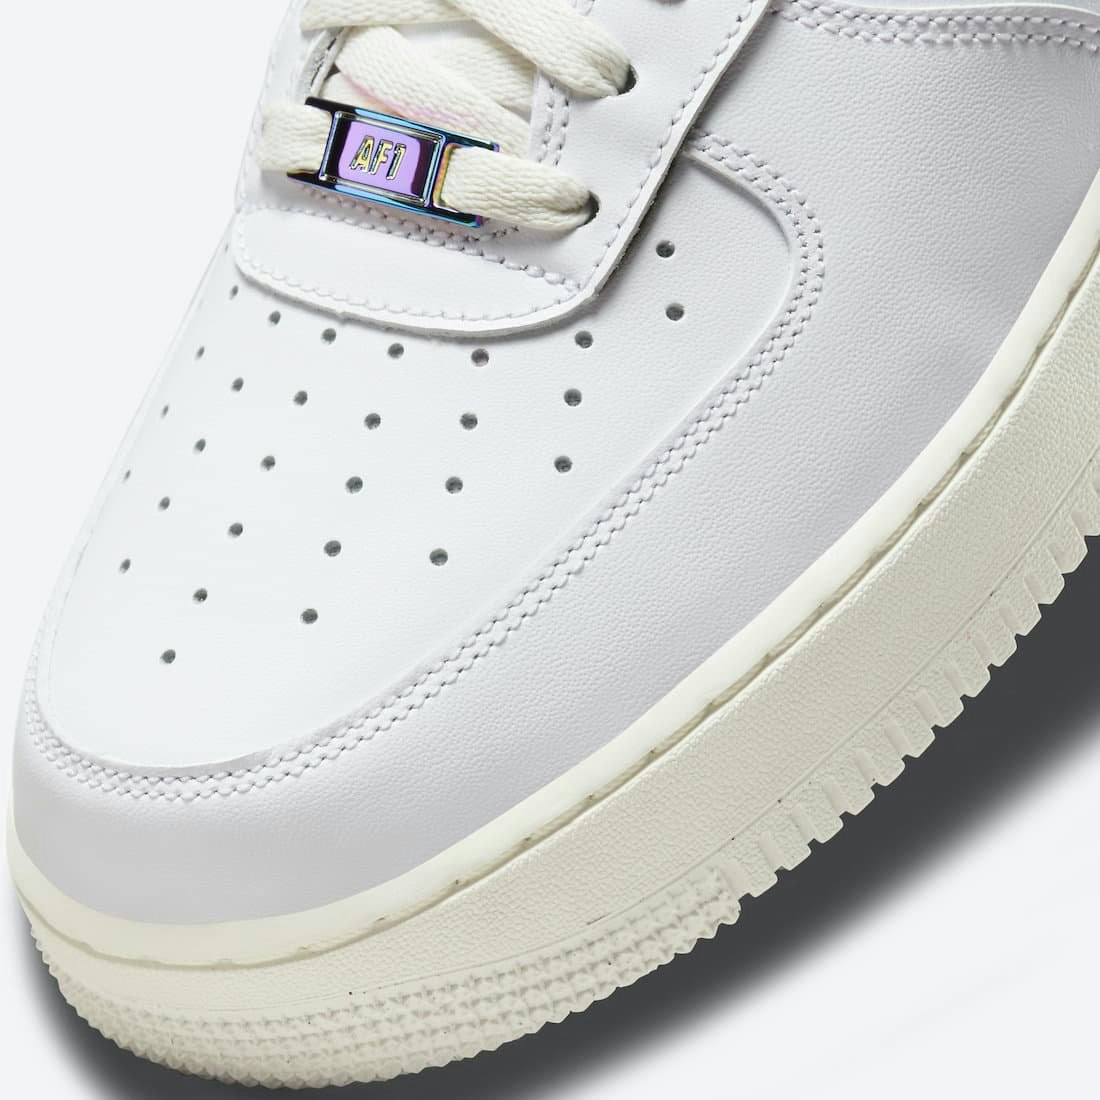 Nike Air Force 1 Low "The Great Unity"